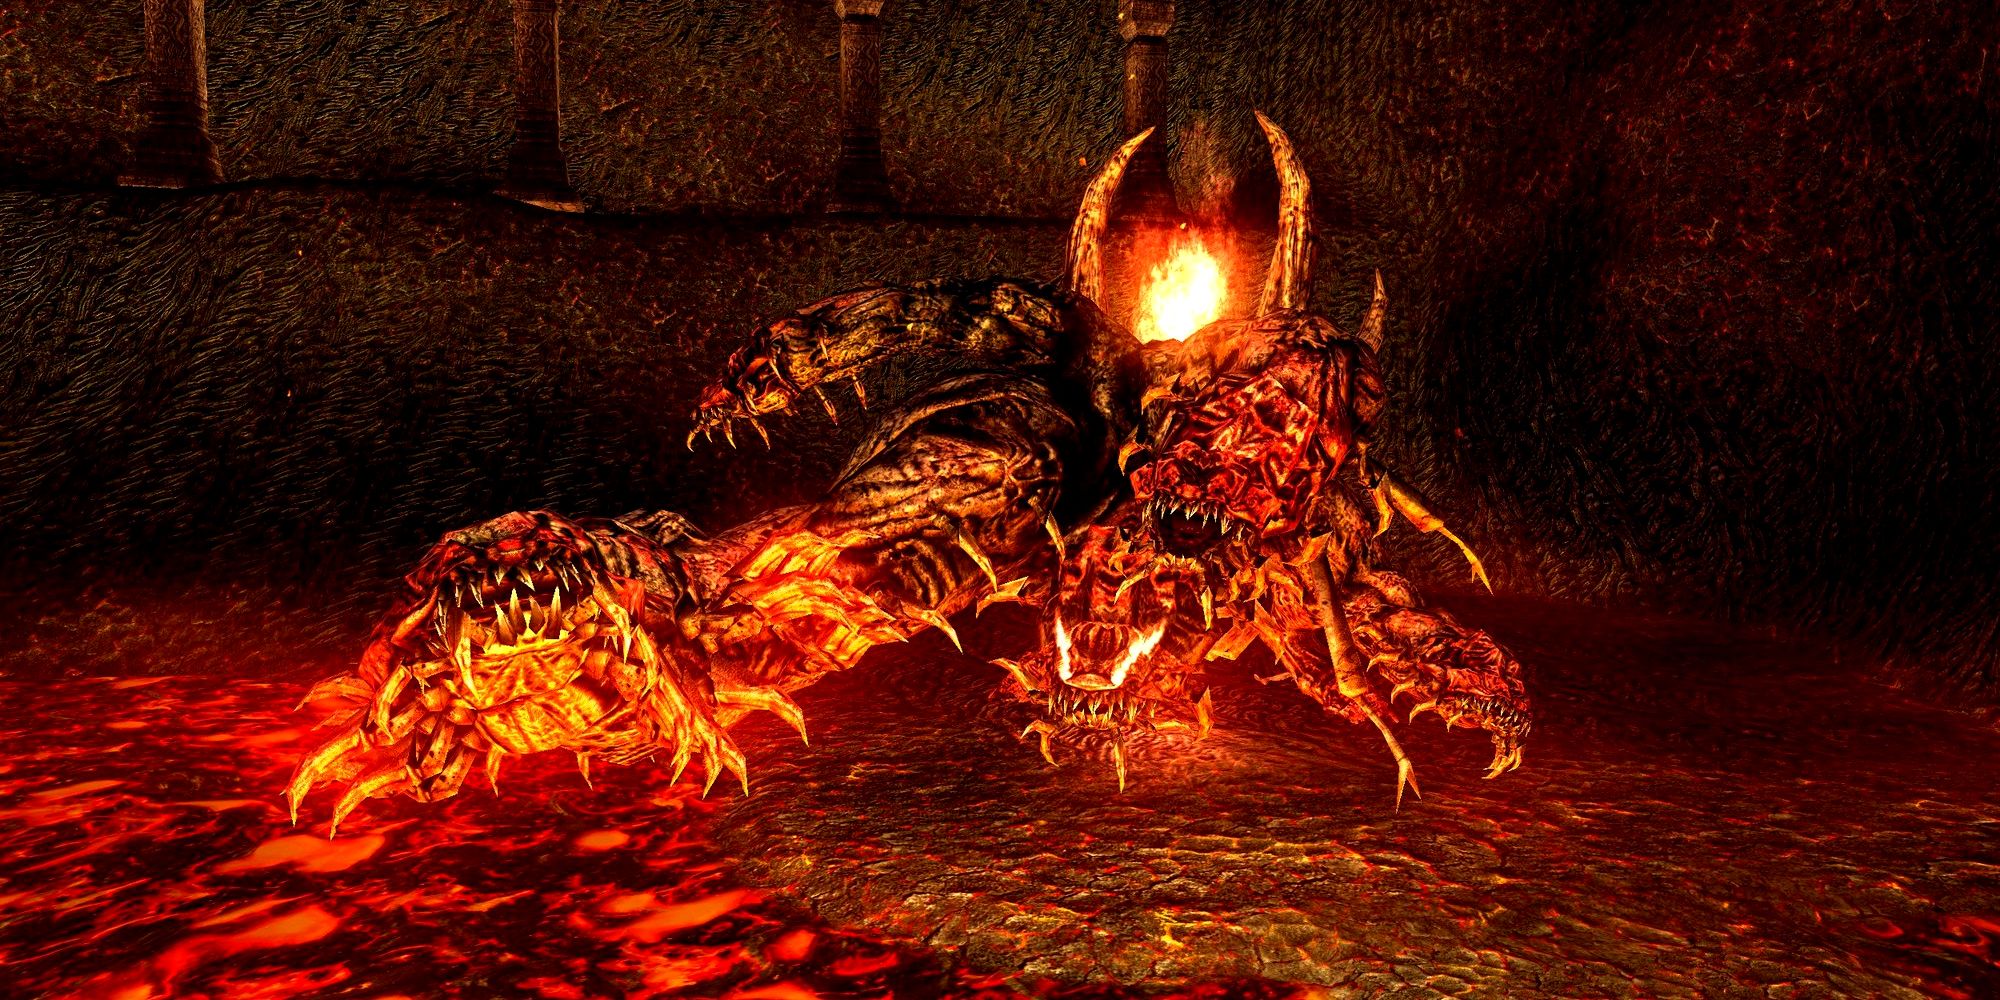 demon composed of centipede parts in a room full of lava